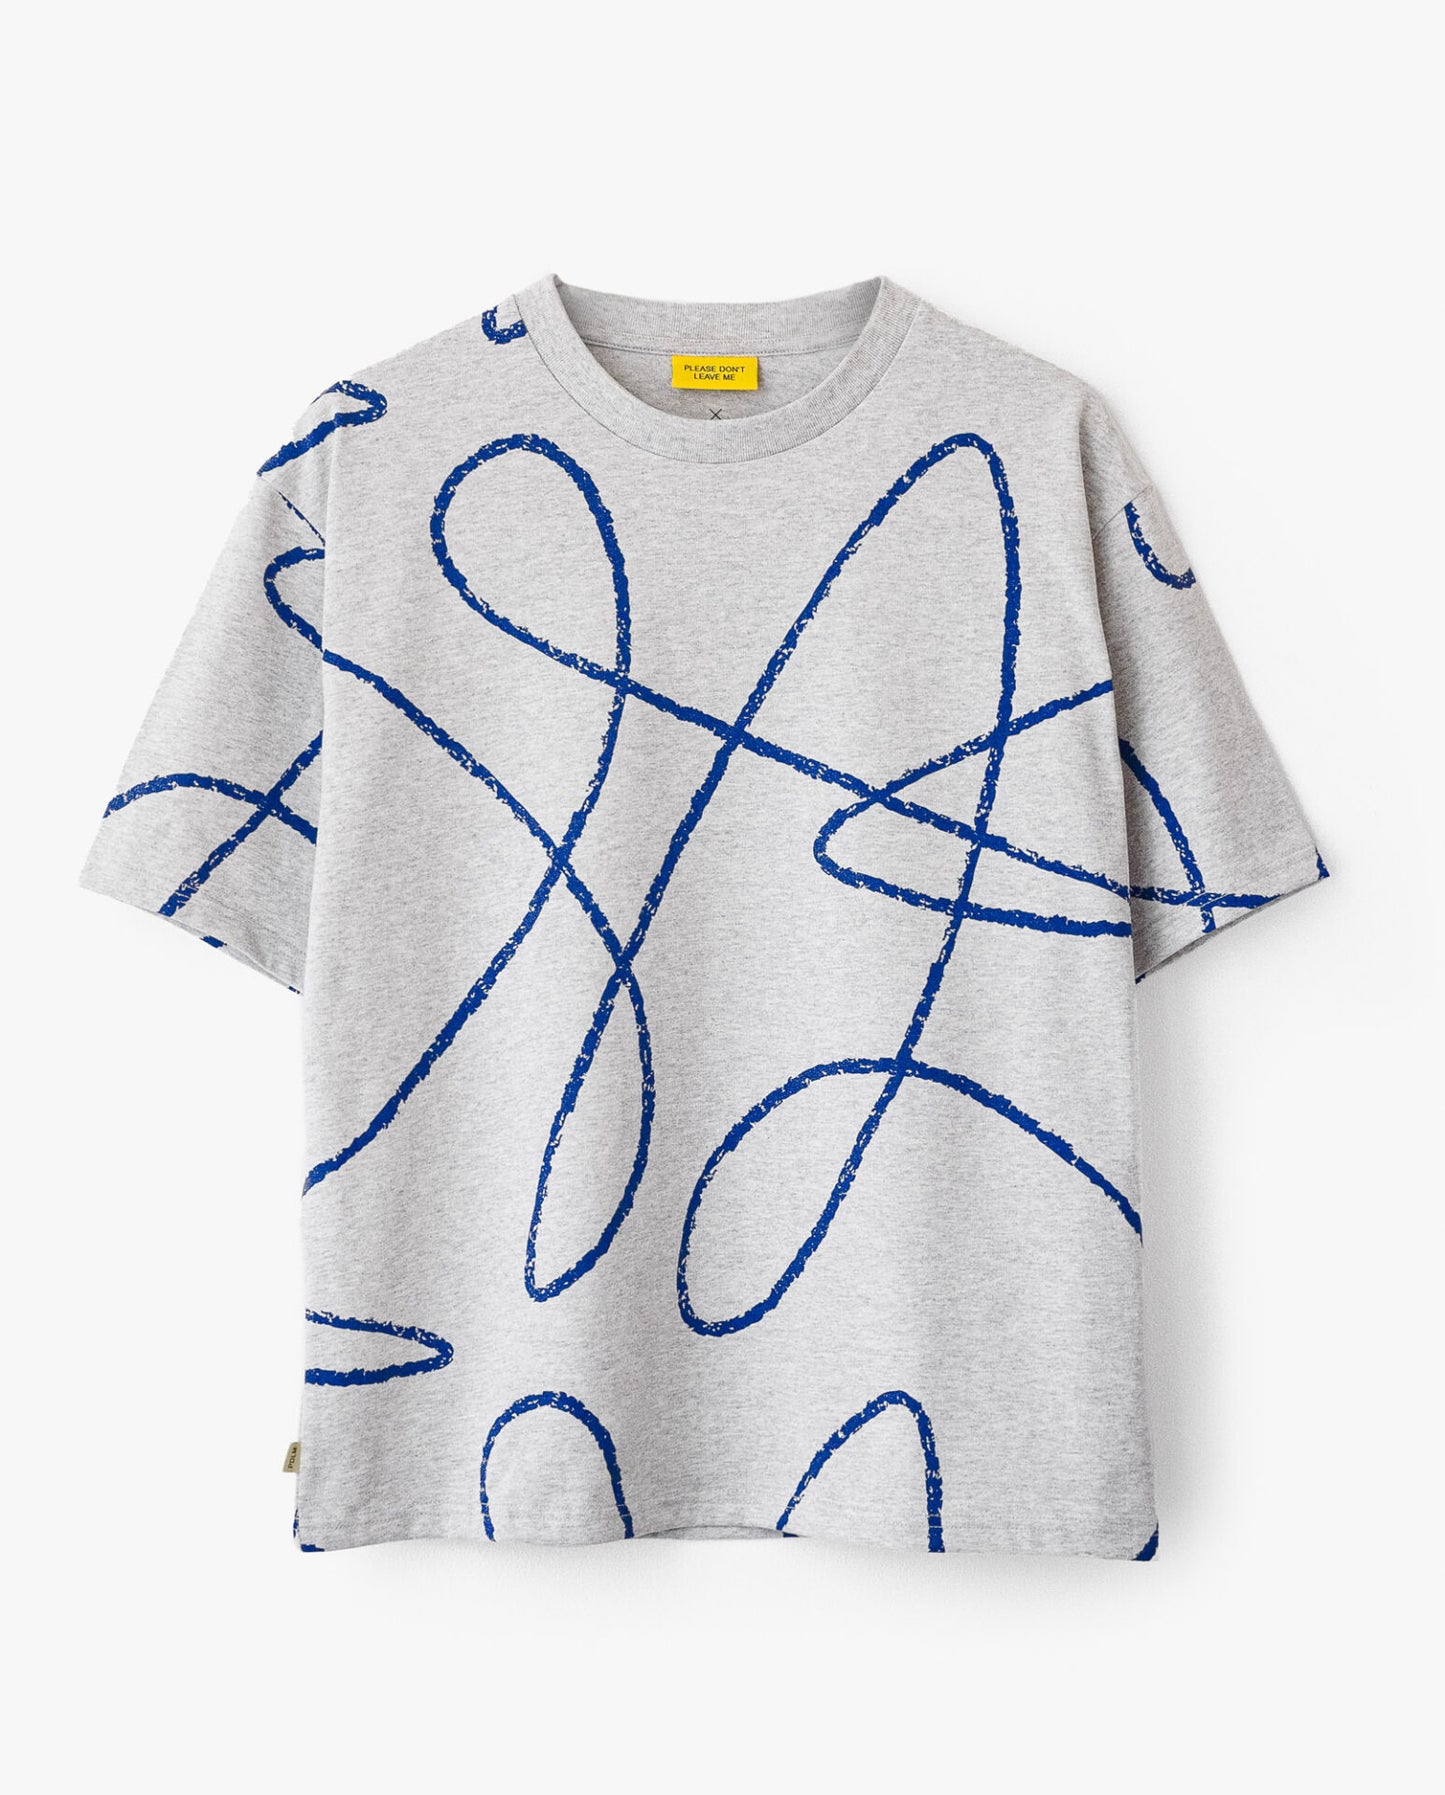 POETIC COLLECTIVE X PDLM - DOODLE TEE - GREY/BLUE